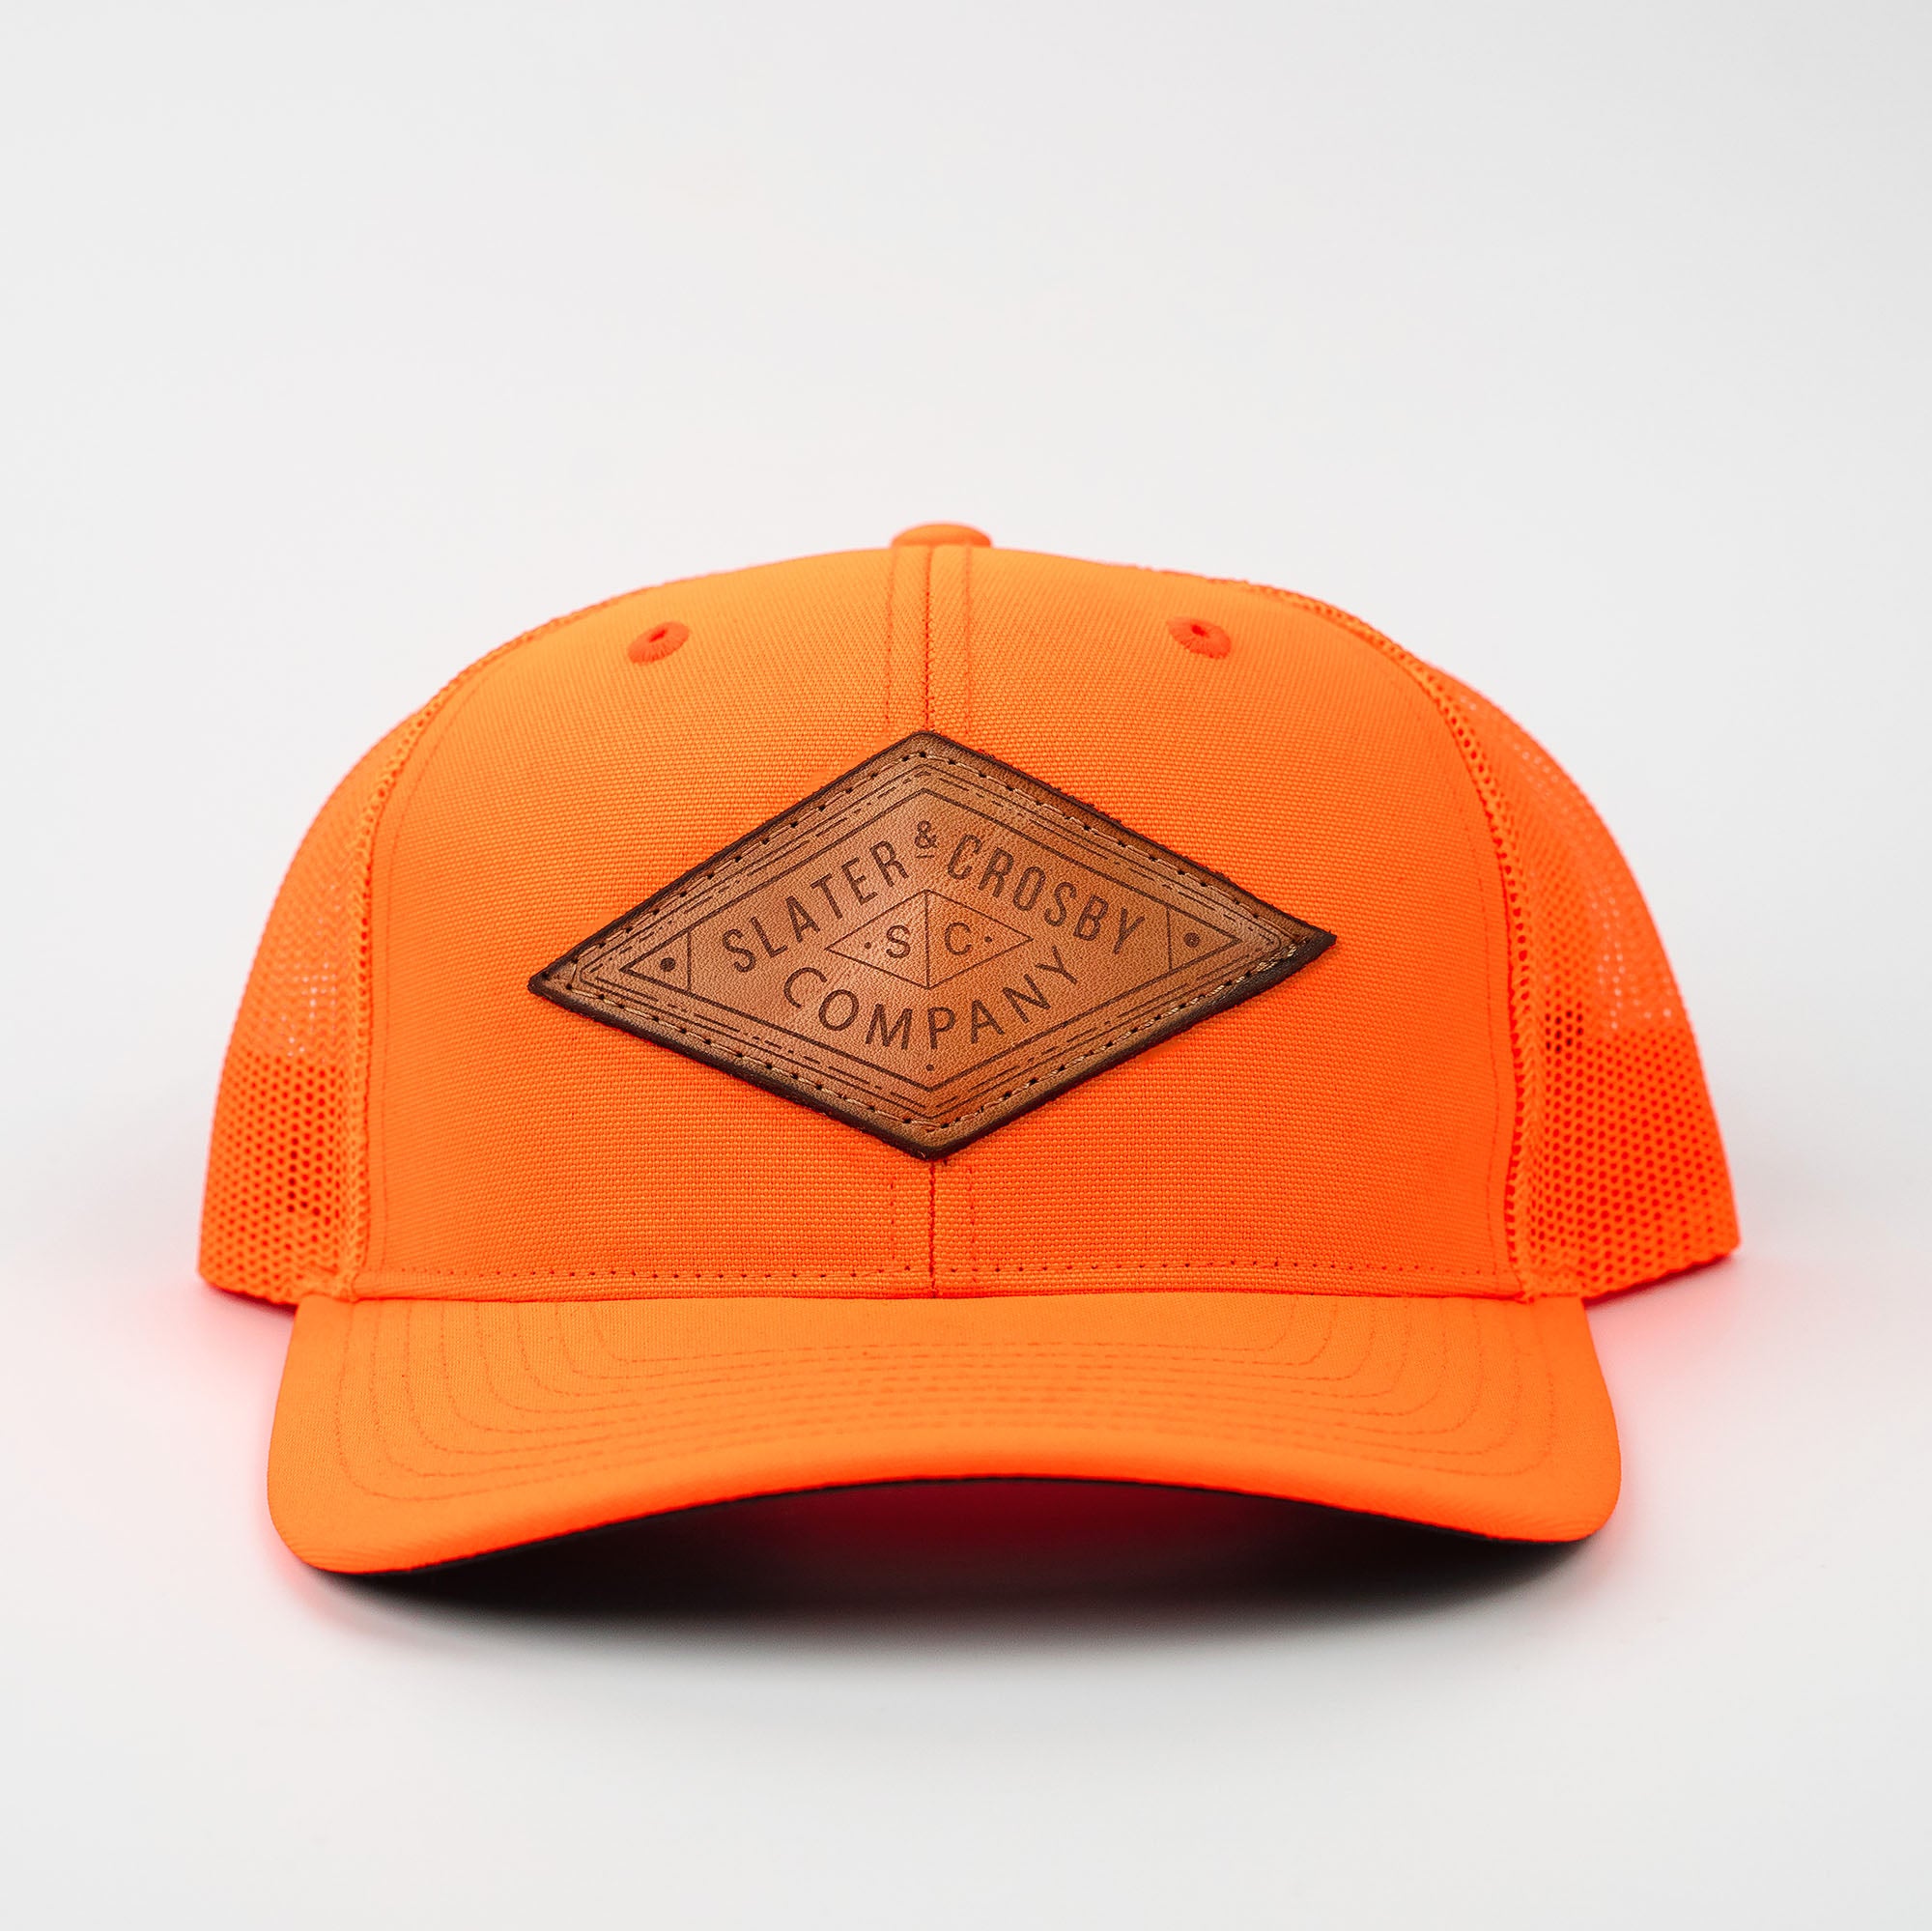 Neon orange Richardson 882 trucker hat with customized leather patch from Holtz Leather Co in Huntsville, Alabama